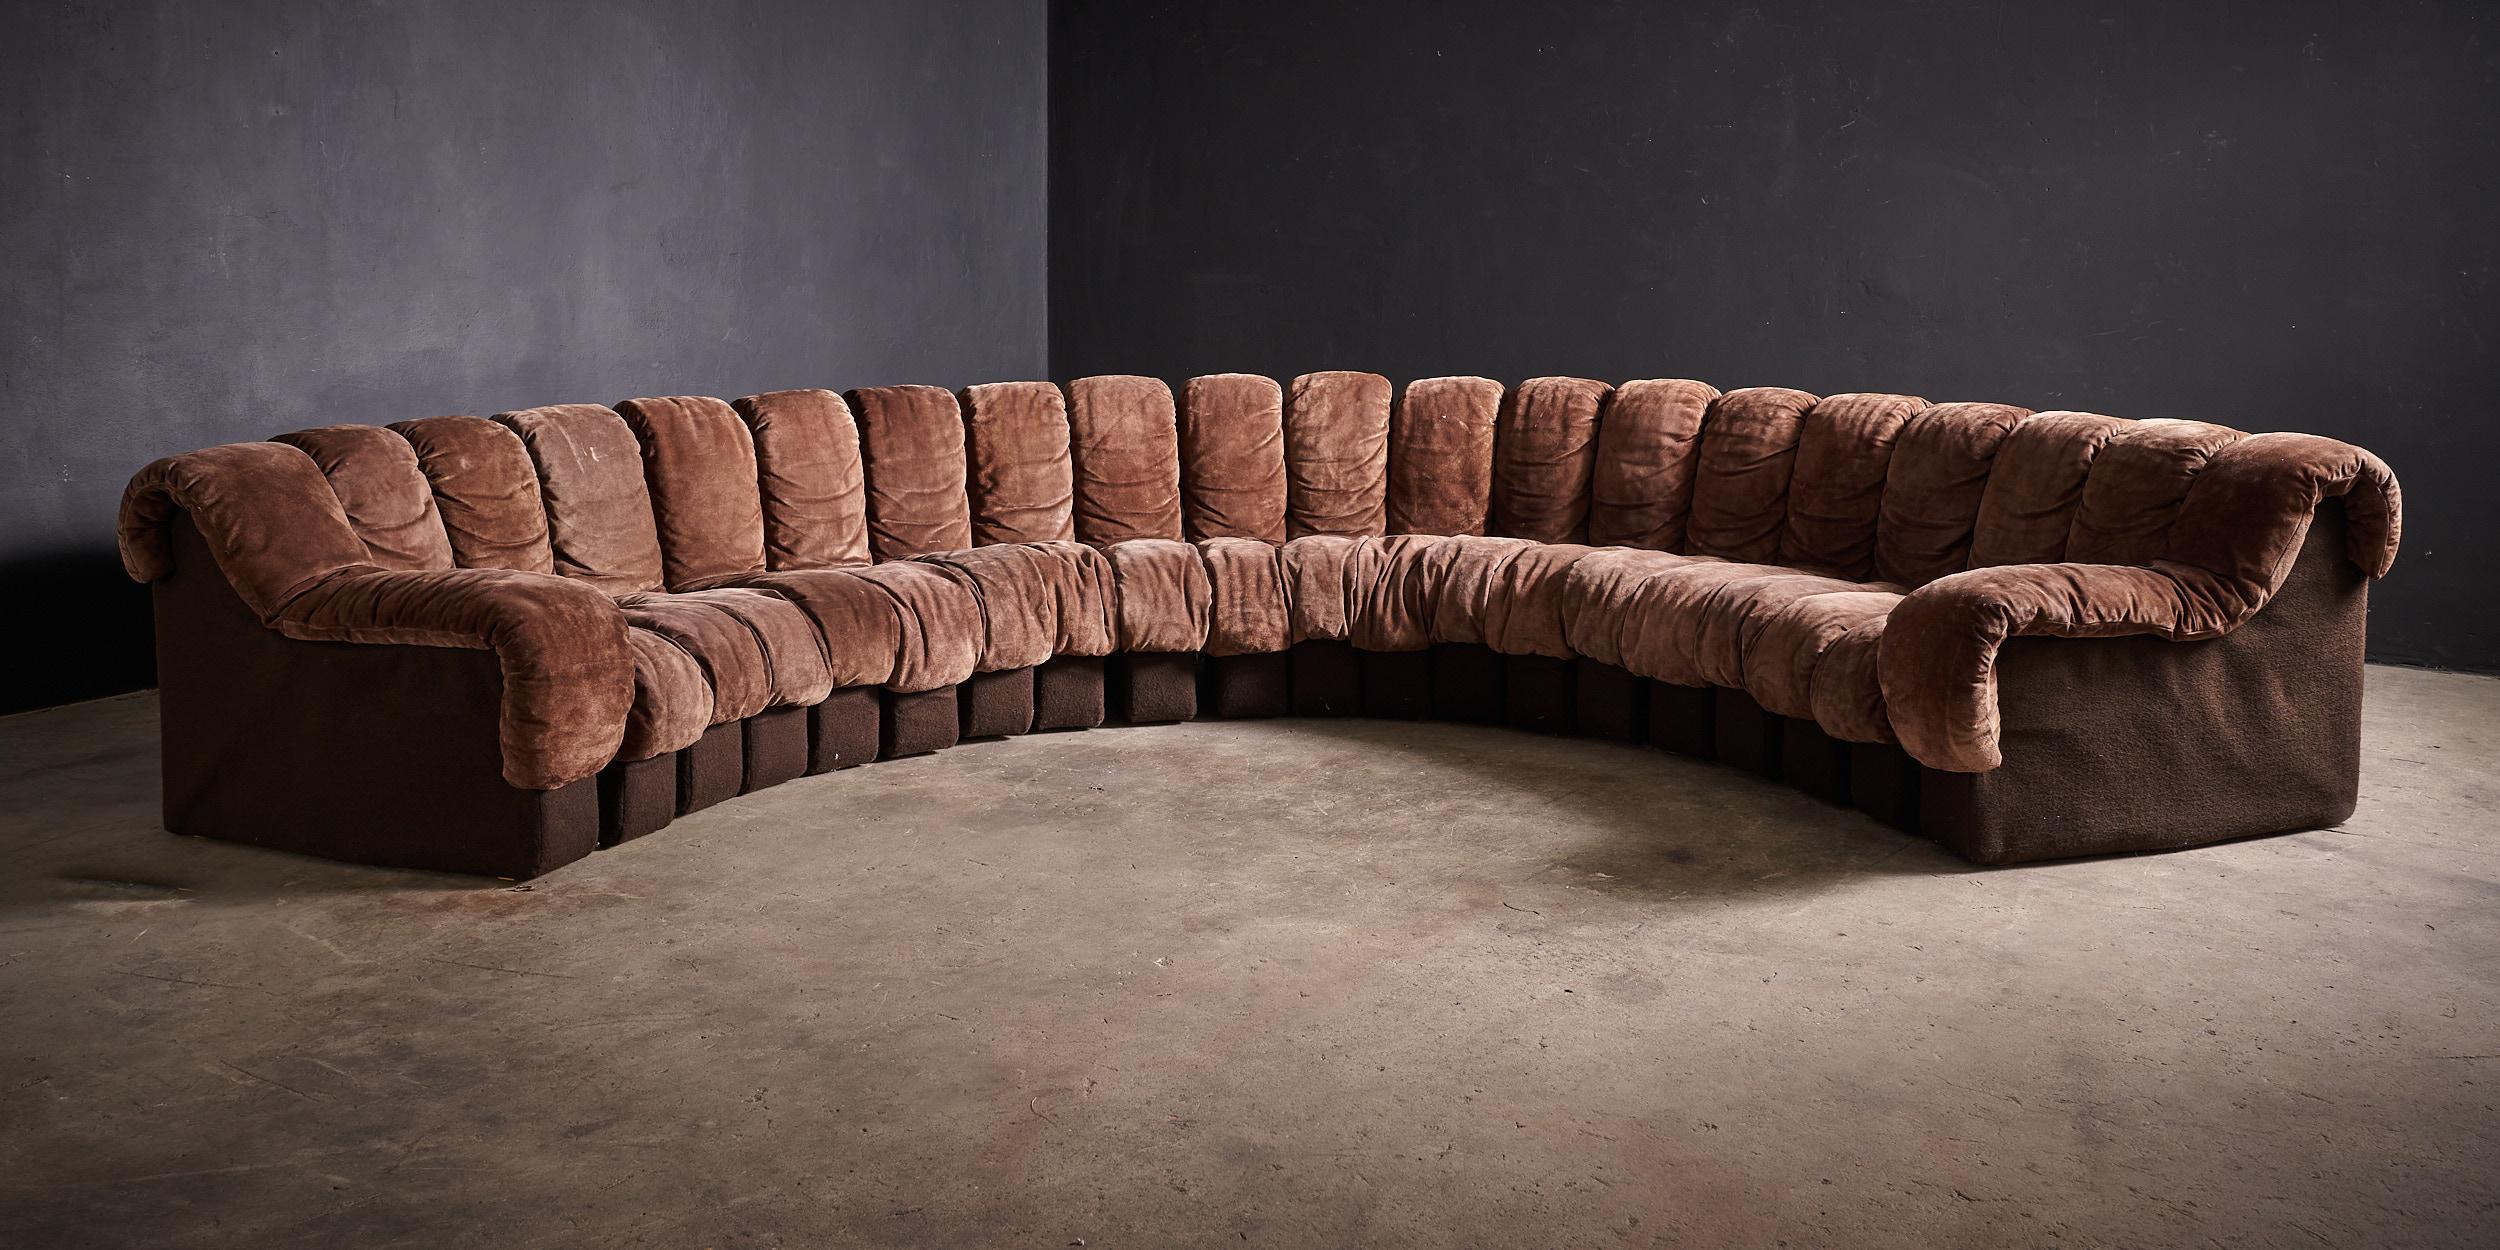 Suede DS600 Modular Non Stop Sofa by Ueli Berger for De Sede. Set of 20 Pieces For Sale